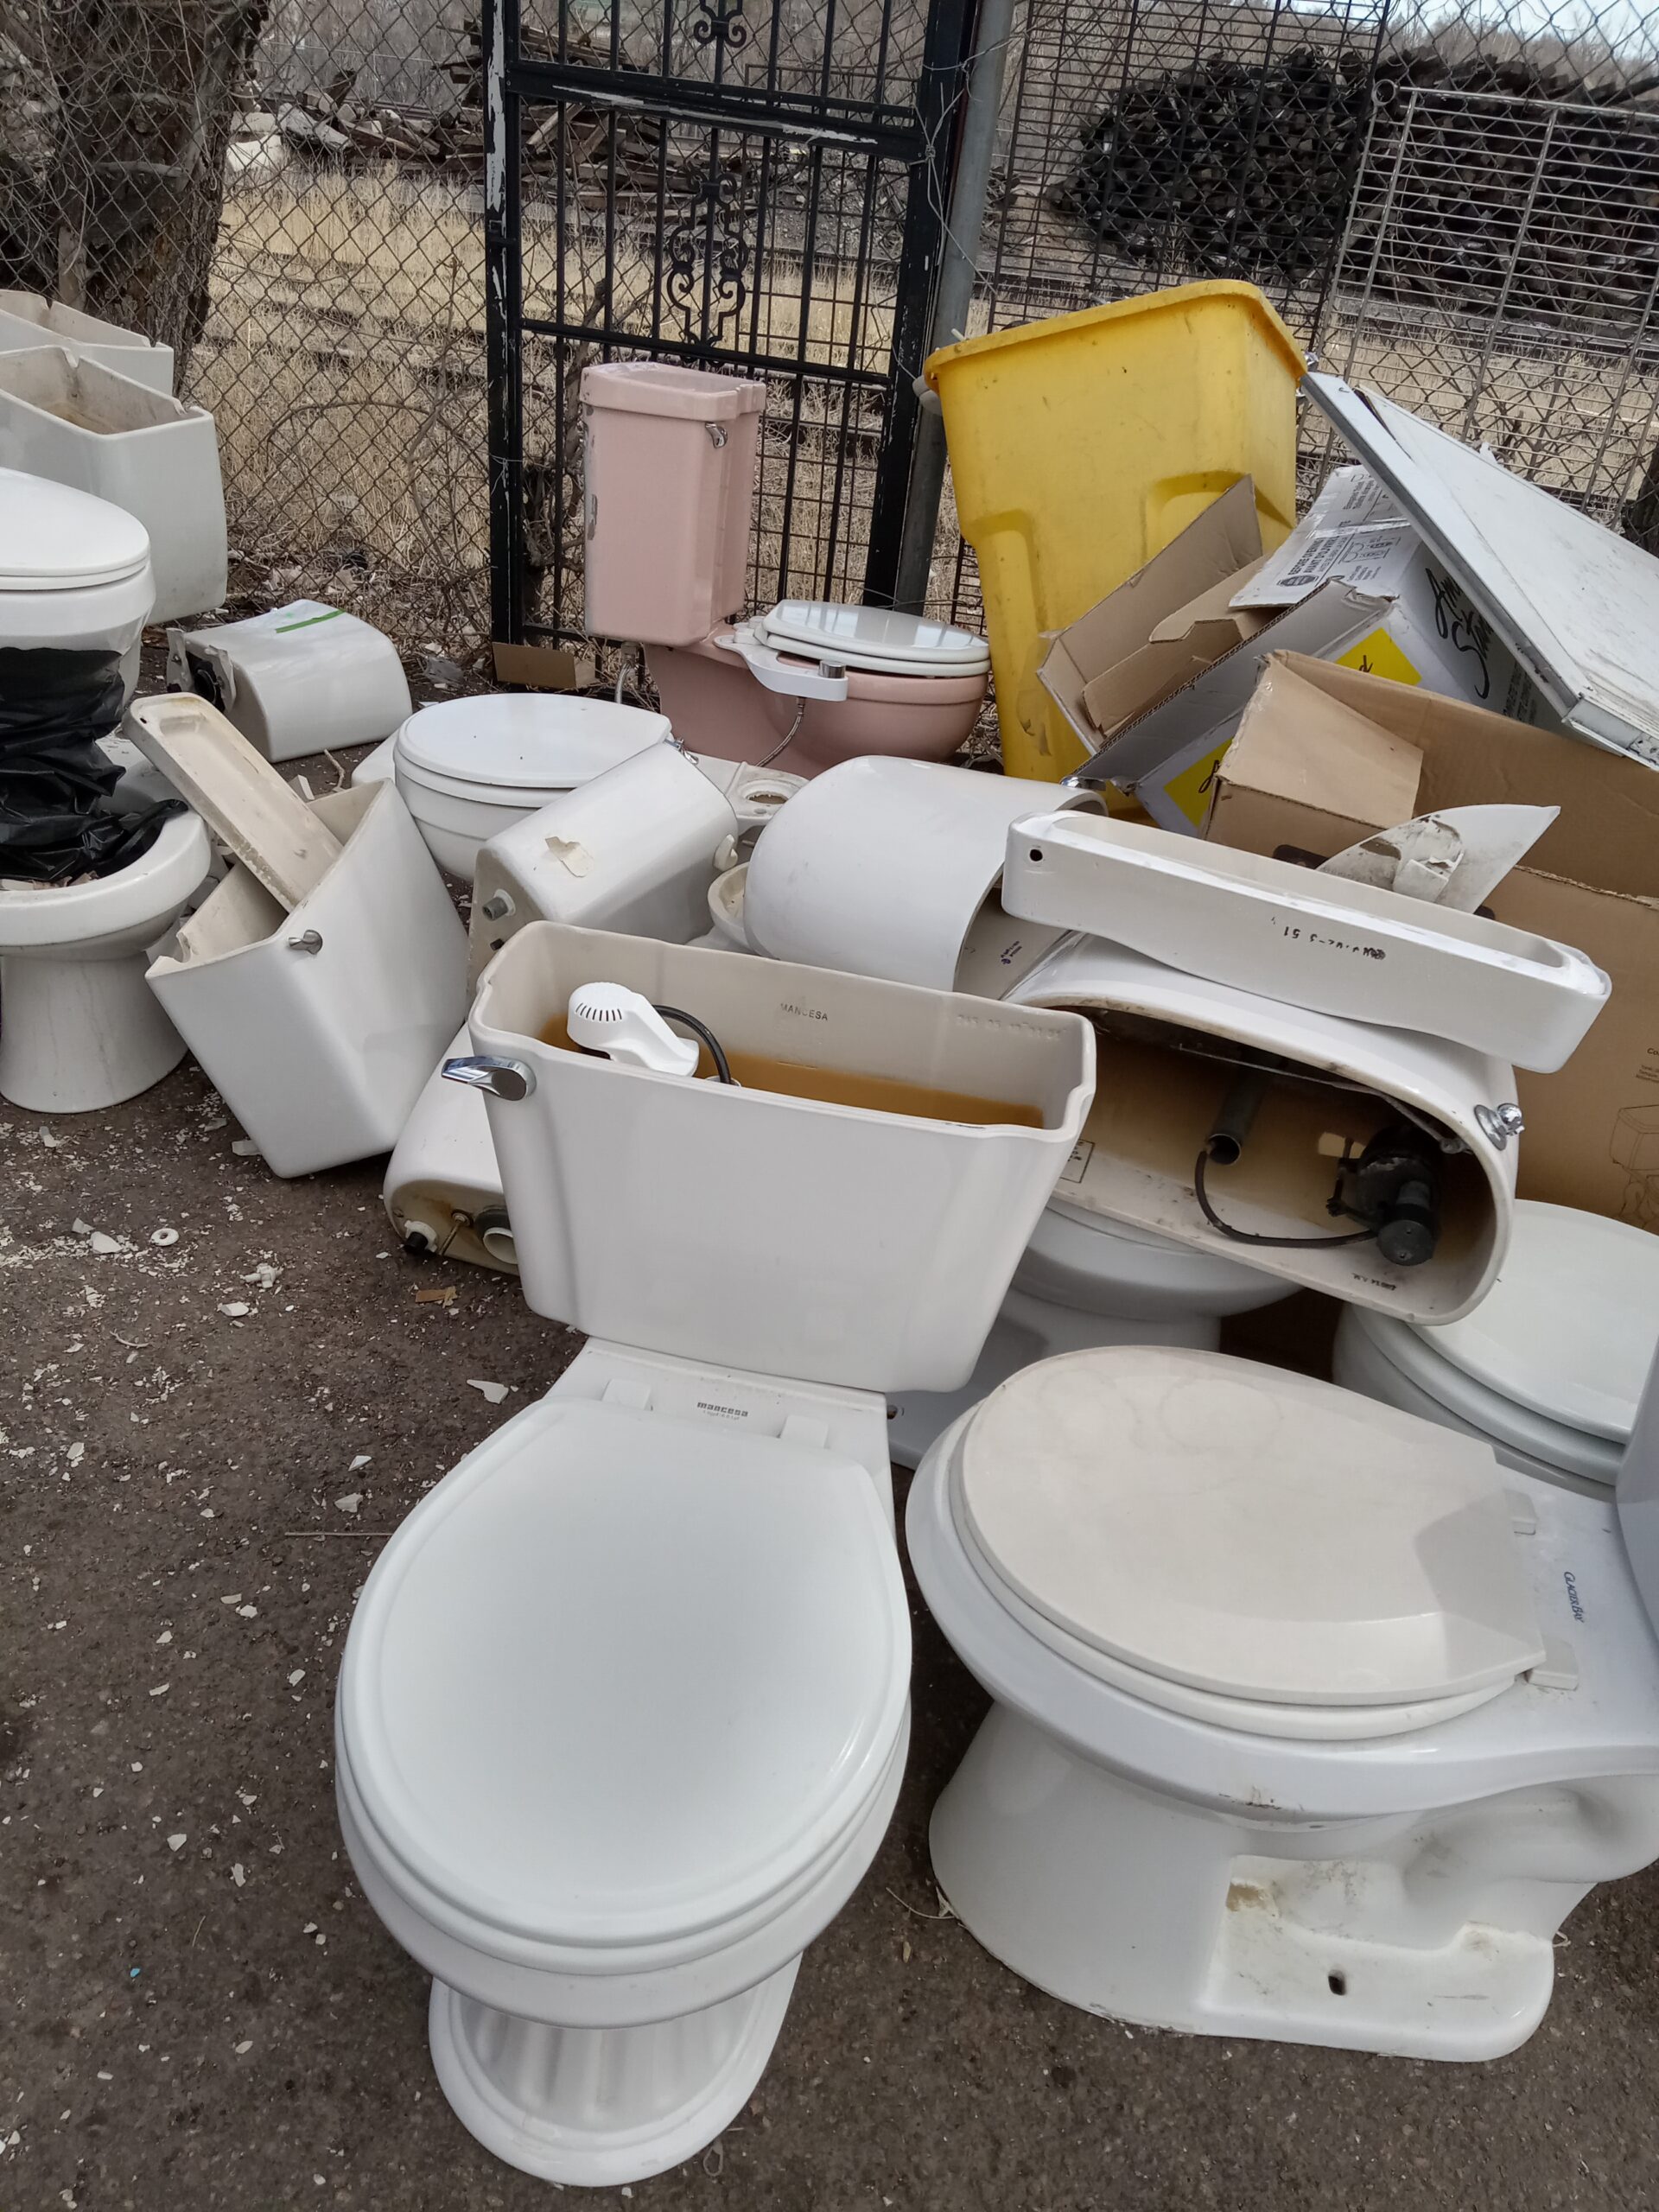 Toilets for recycling